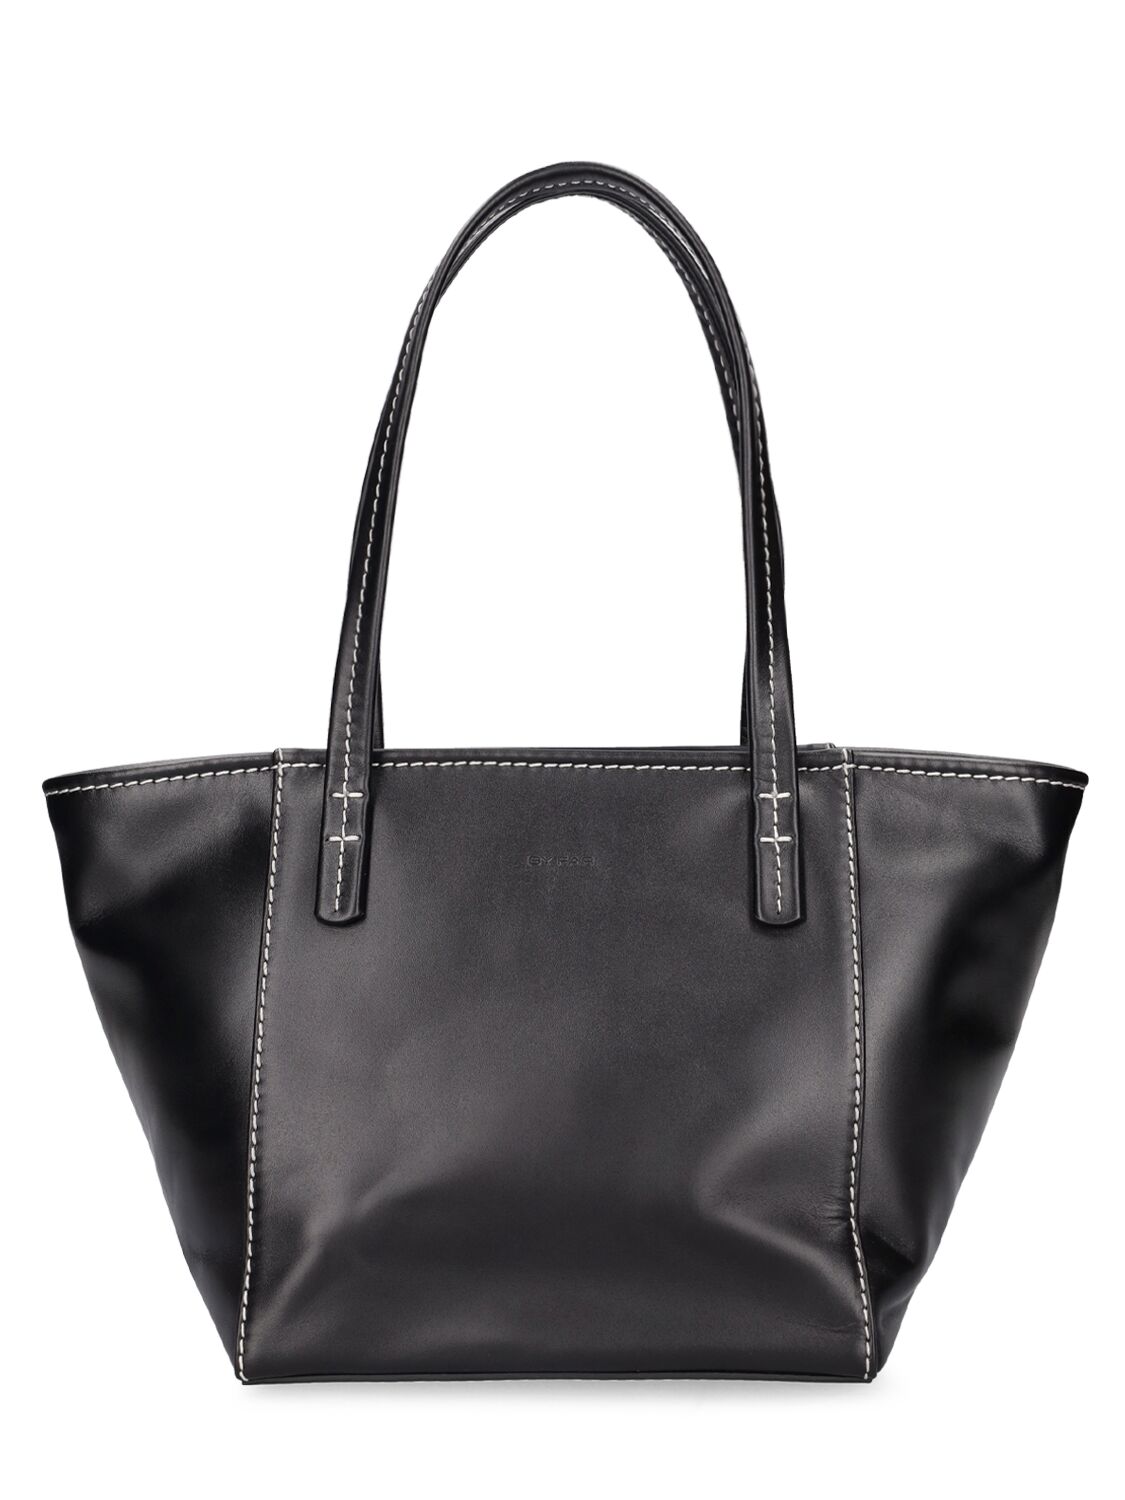 Slim Tote Silver Embossed Shellsuit Fabric and Leather - BY FAR